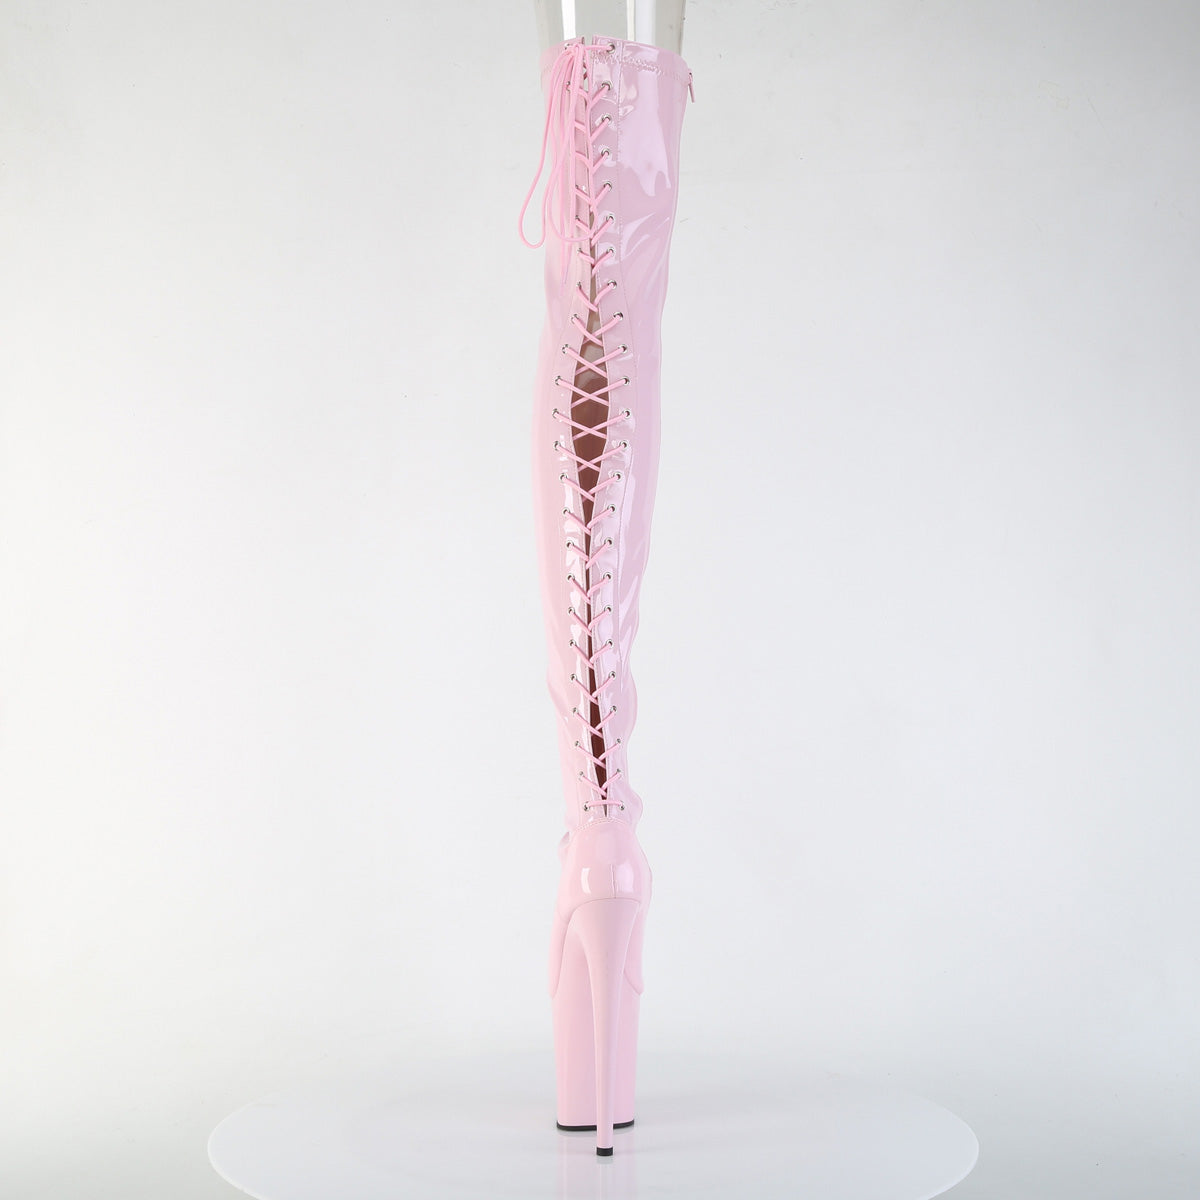 FLAMINGO-3850 Baby Pink Pleaser Pole Dancing Thigh Boots